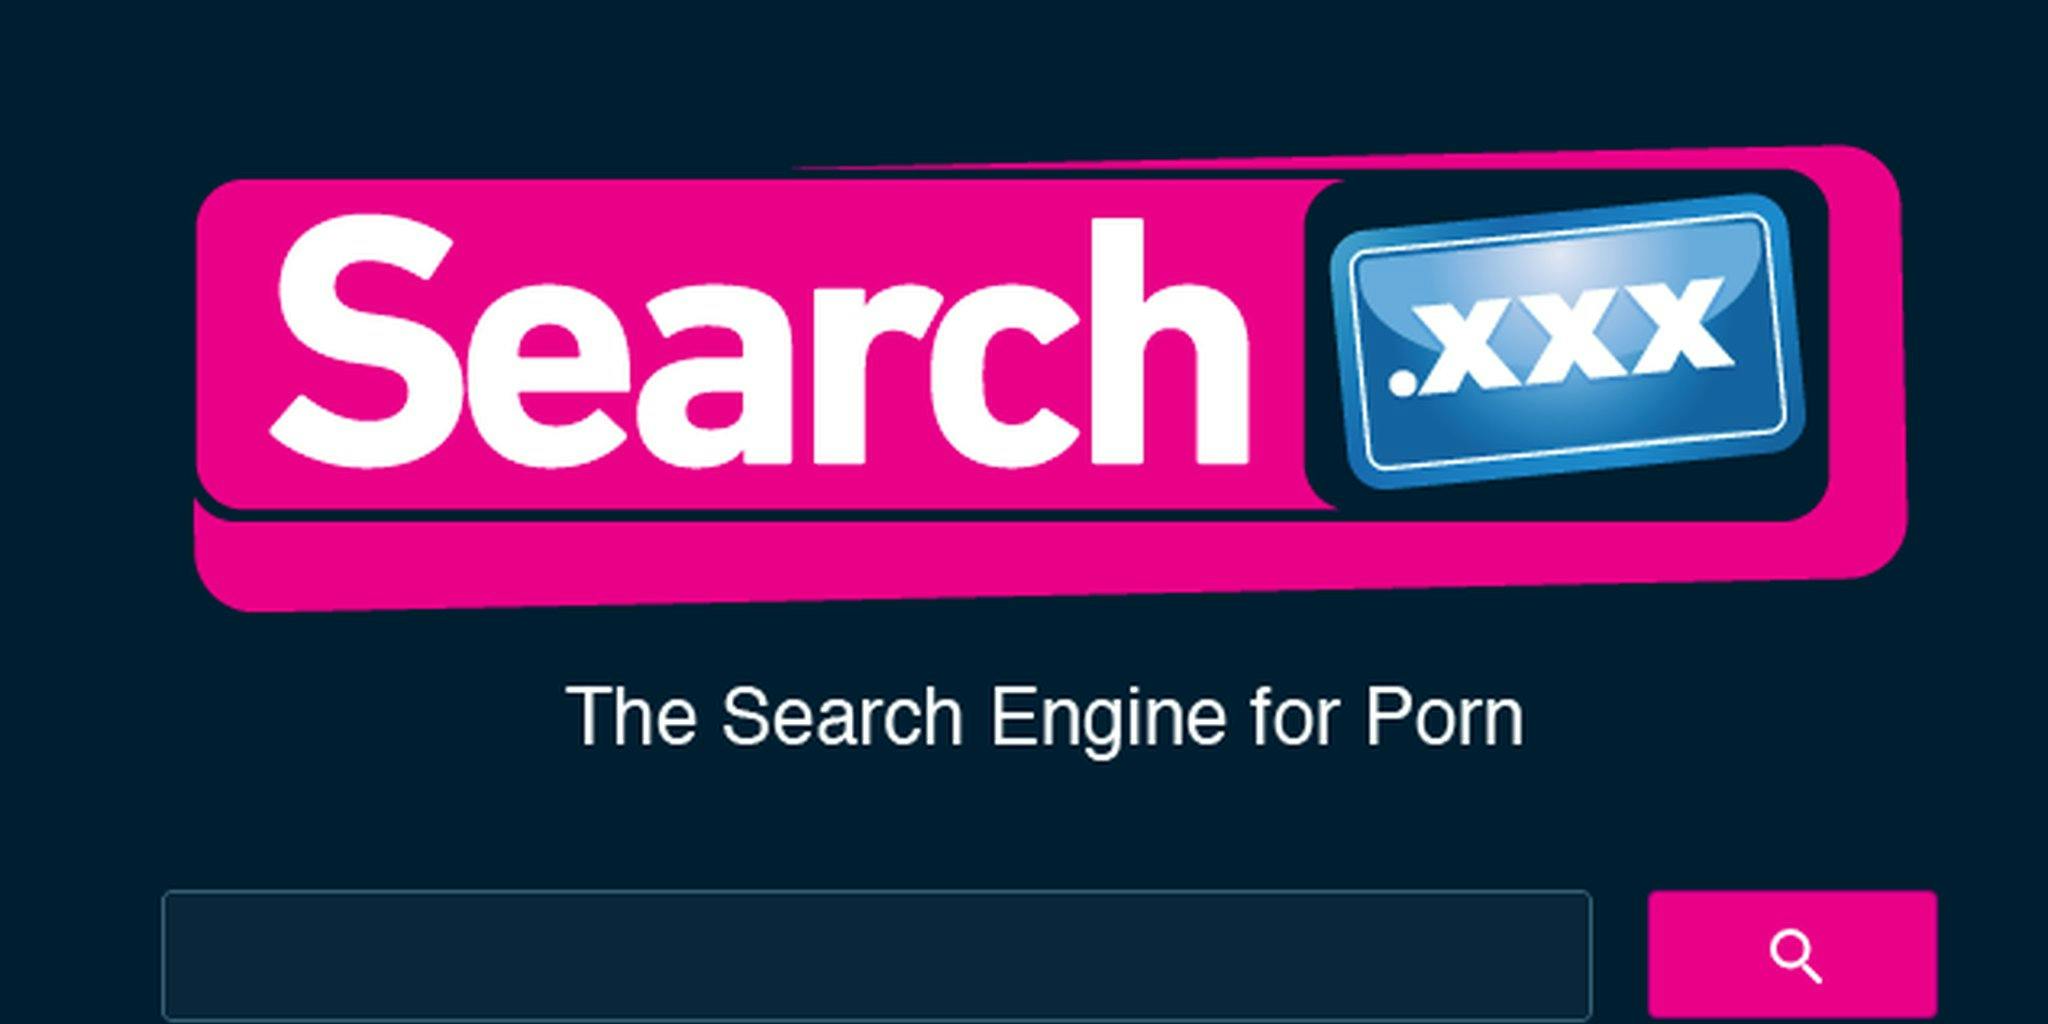 Search.xxx wants to be the Google of porn